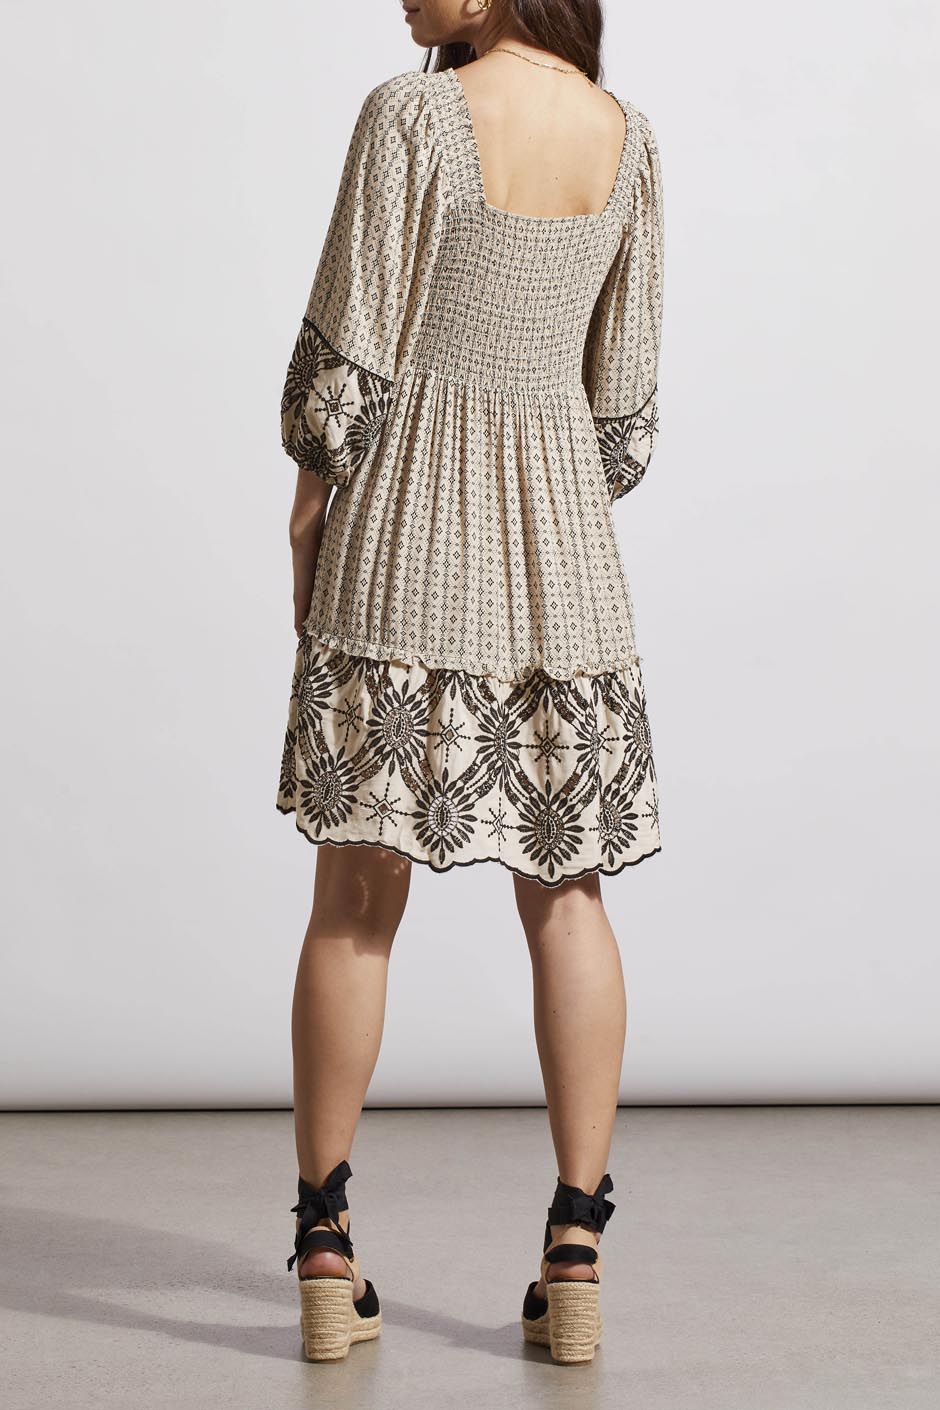 Wear 2 Ways Embroidered Dress by Tribal